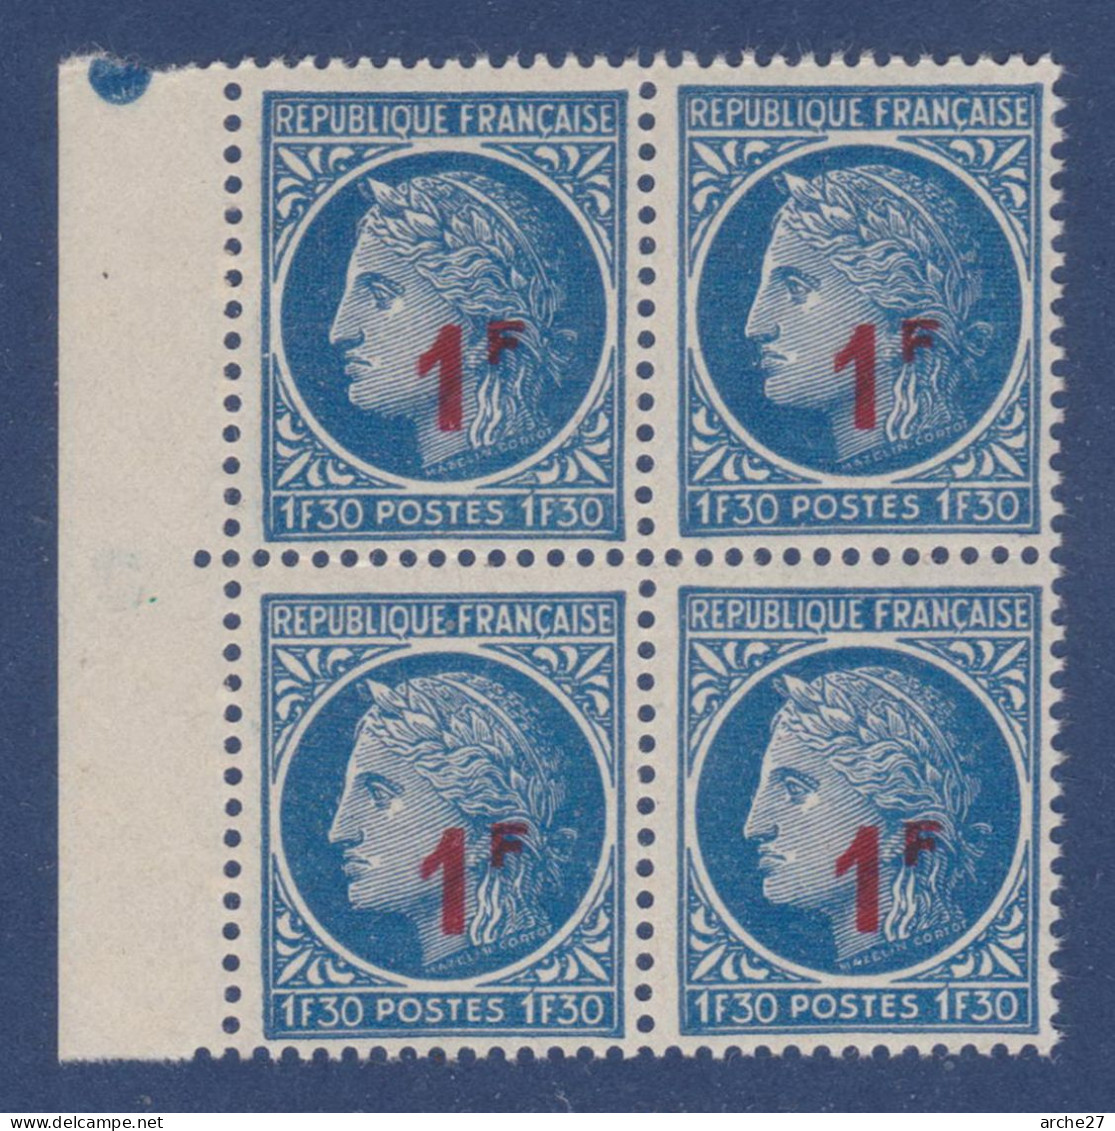 TIMBRE FRANCE N° 791 NEUF ** BLOC DE 4 BDF - Used Stamps